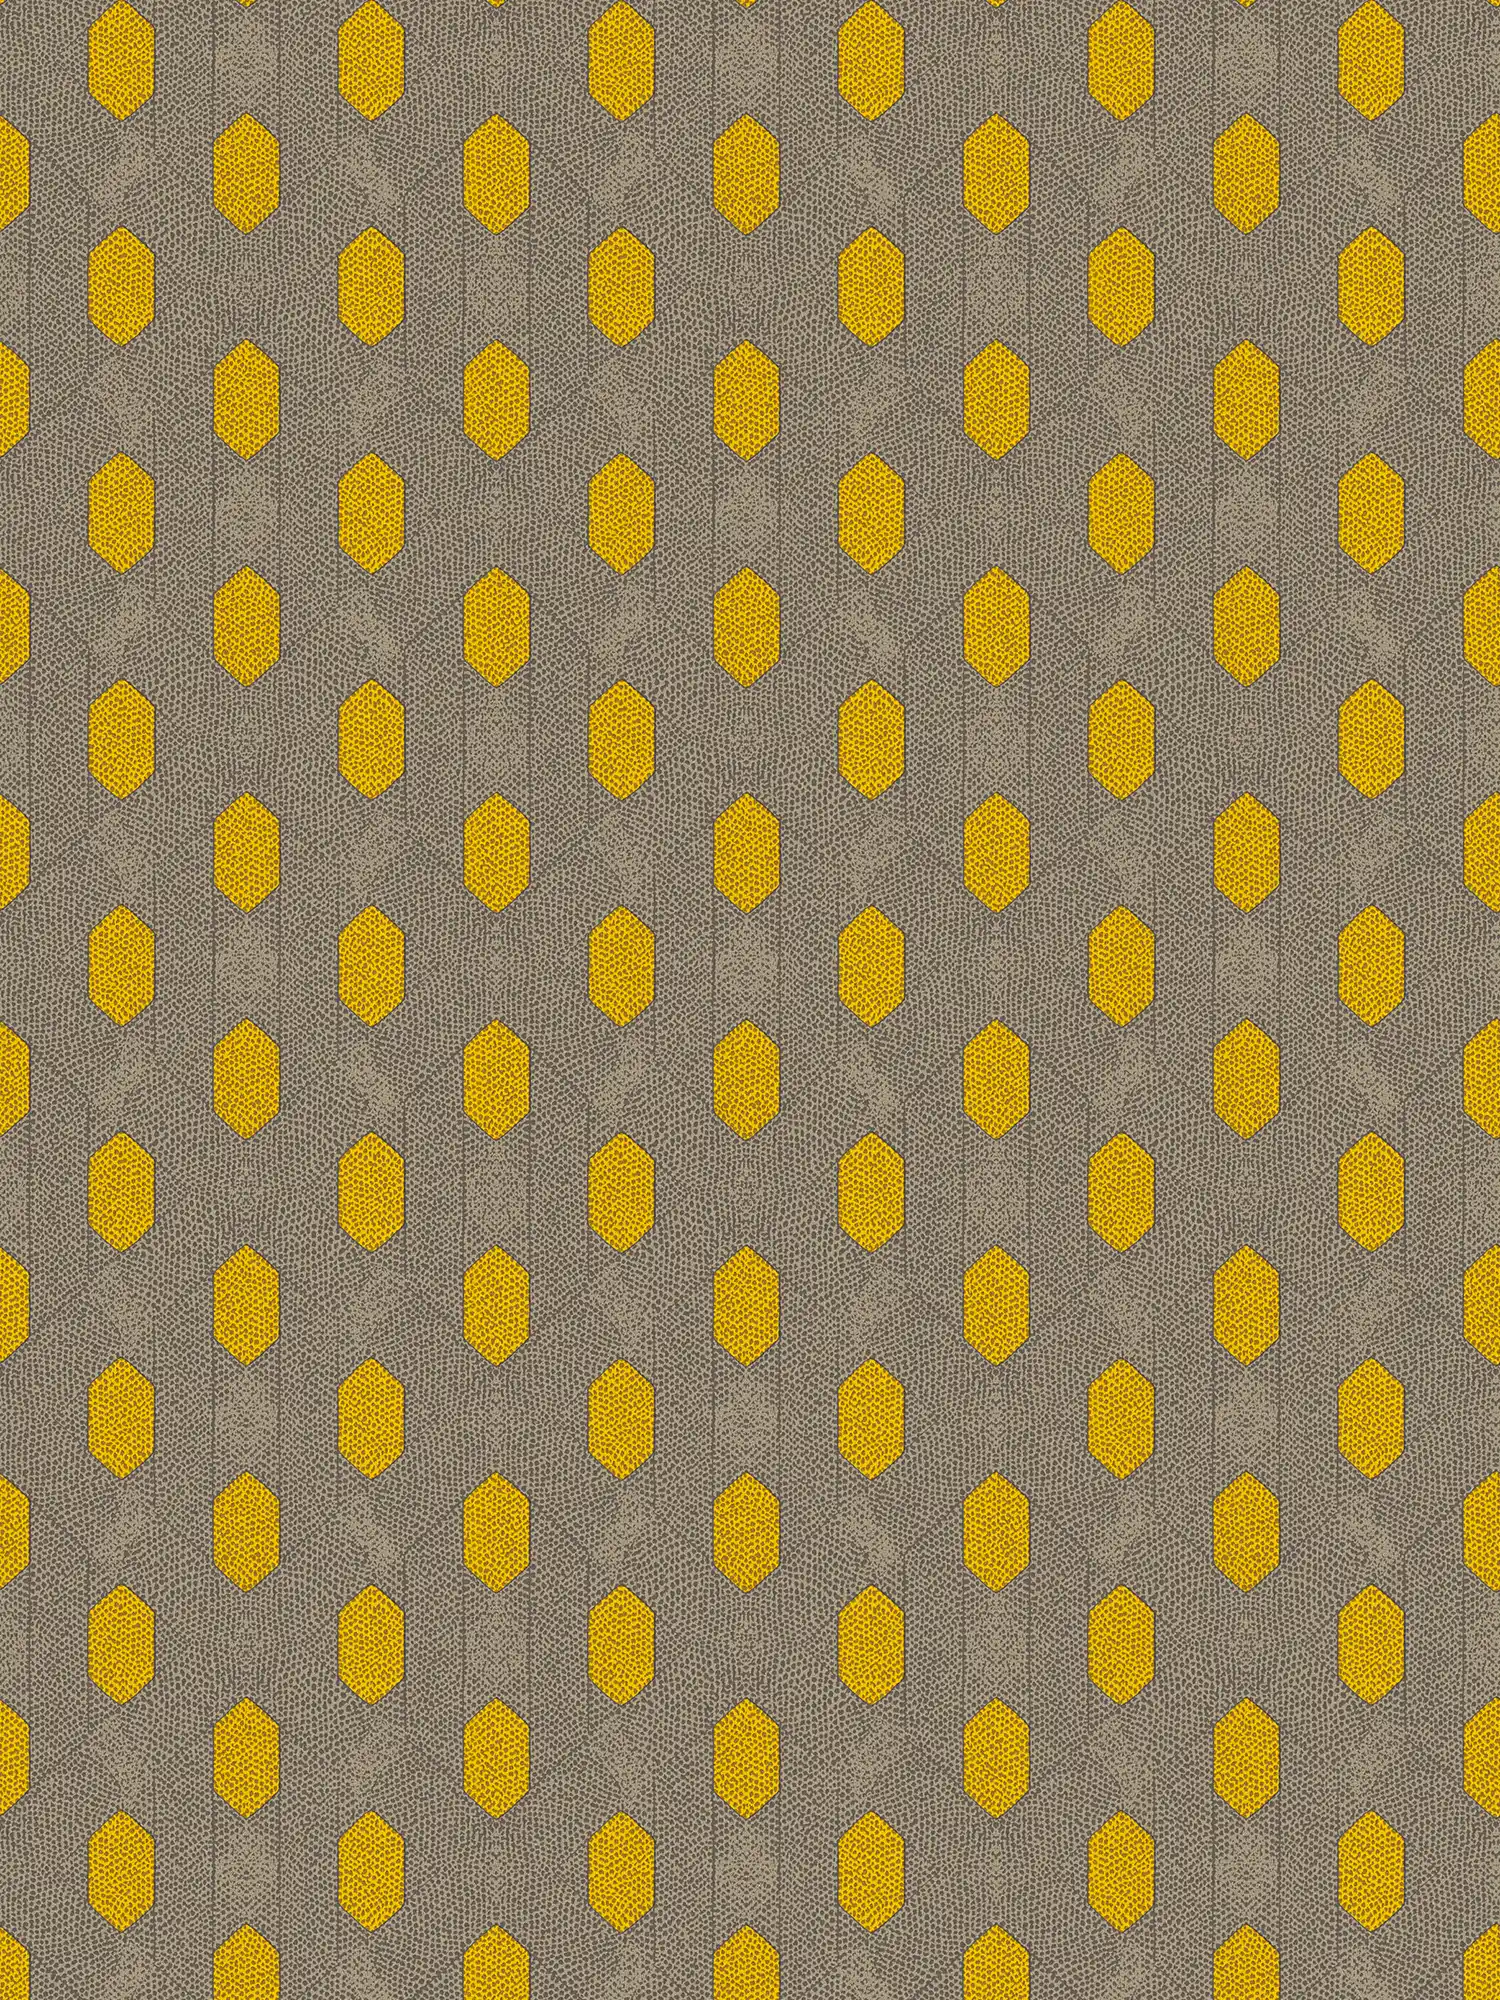 Non-woven wallpaper with geometric dots pattern - yellow, grey, brown
